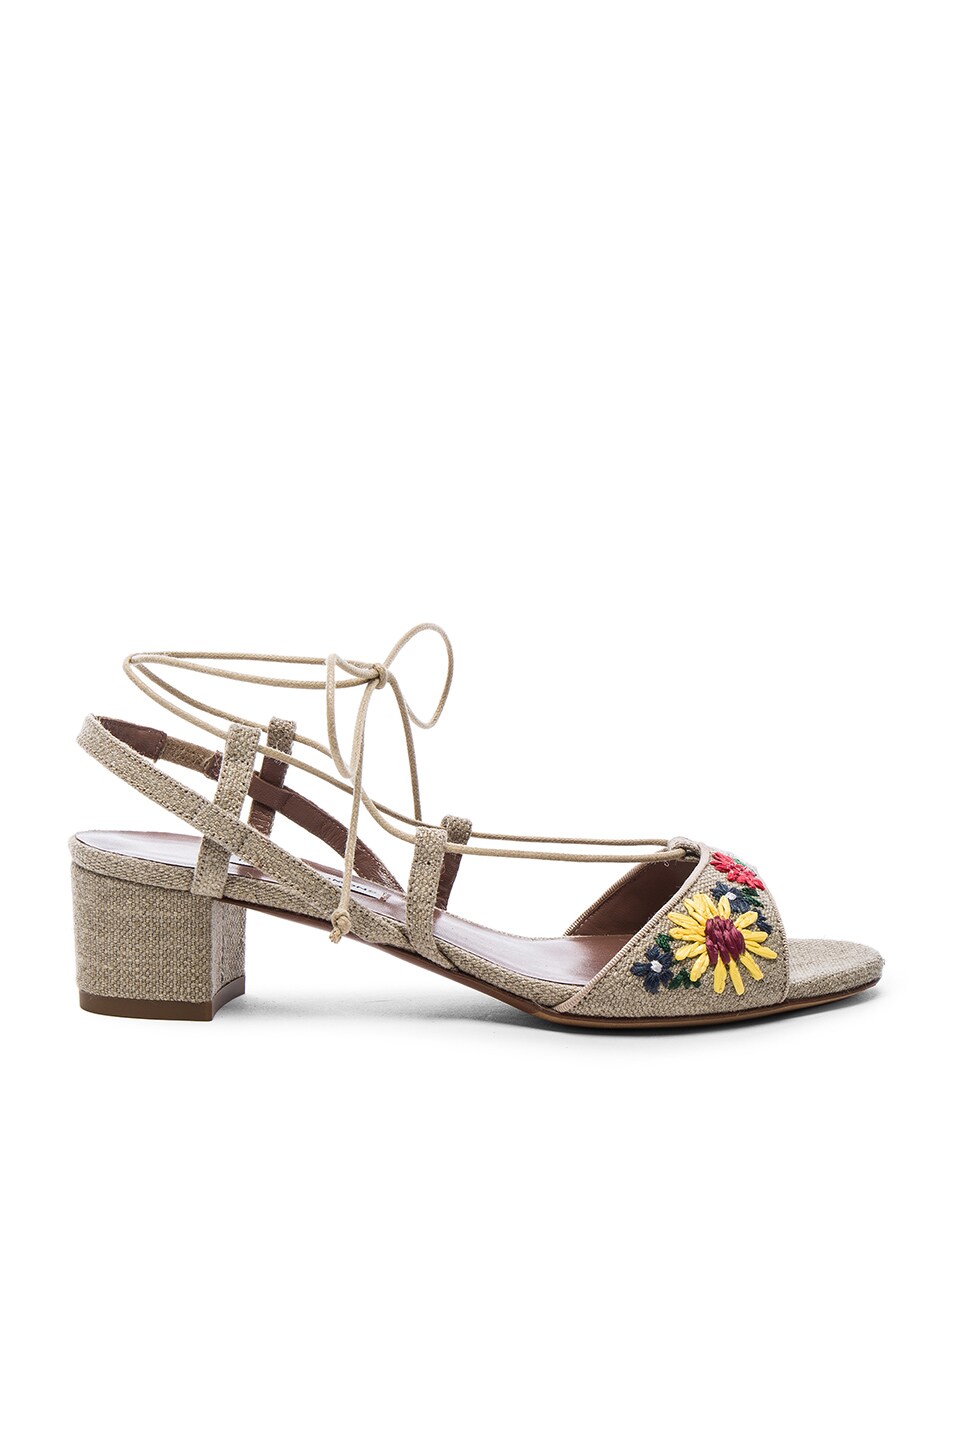 Image 1 of Tabitha Simmons Lori Meadow Sandals in Natural Linen & Multi Raffia Floral Embroidery